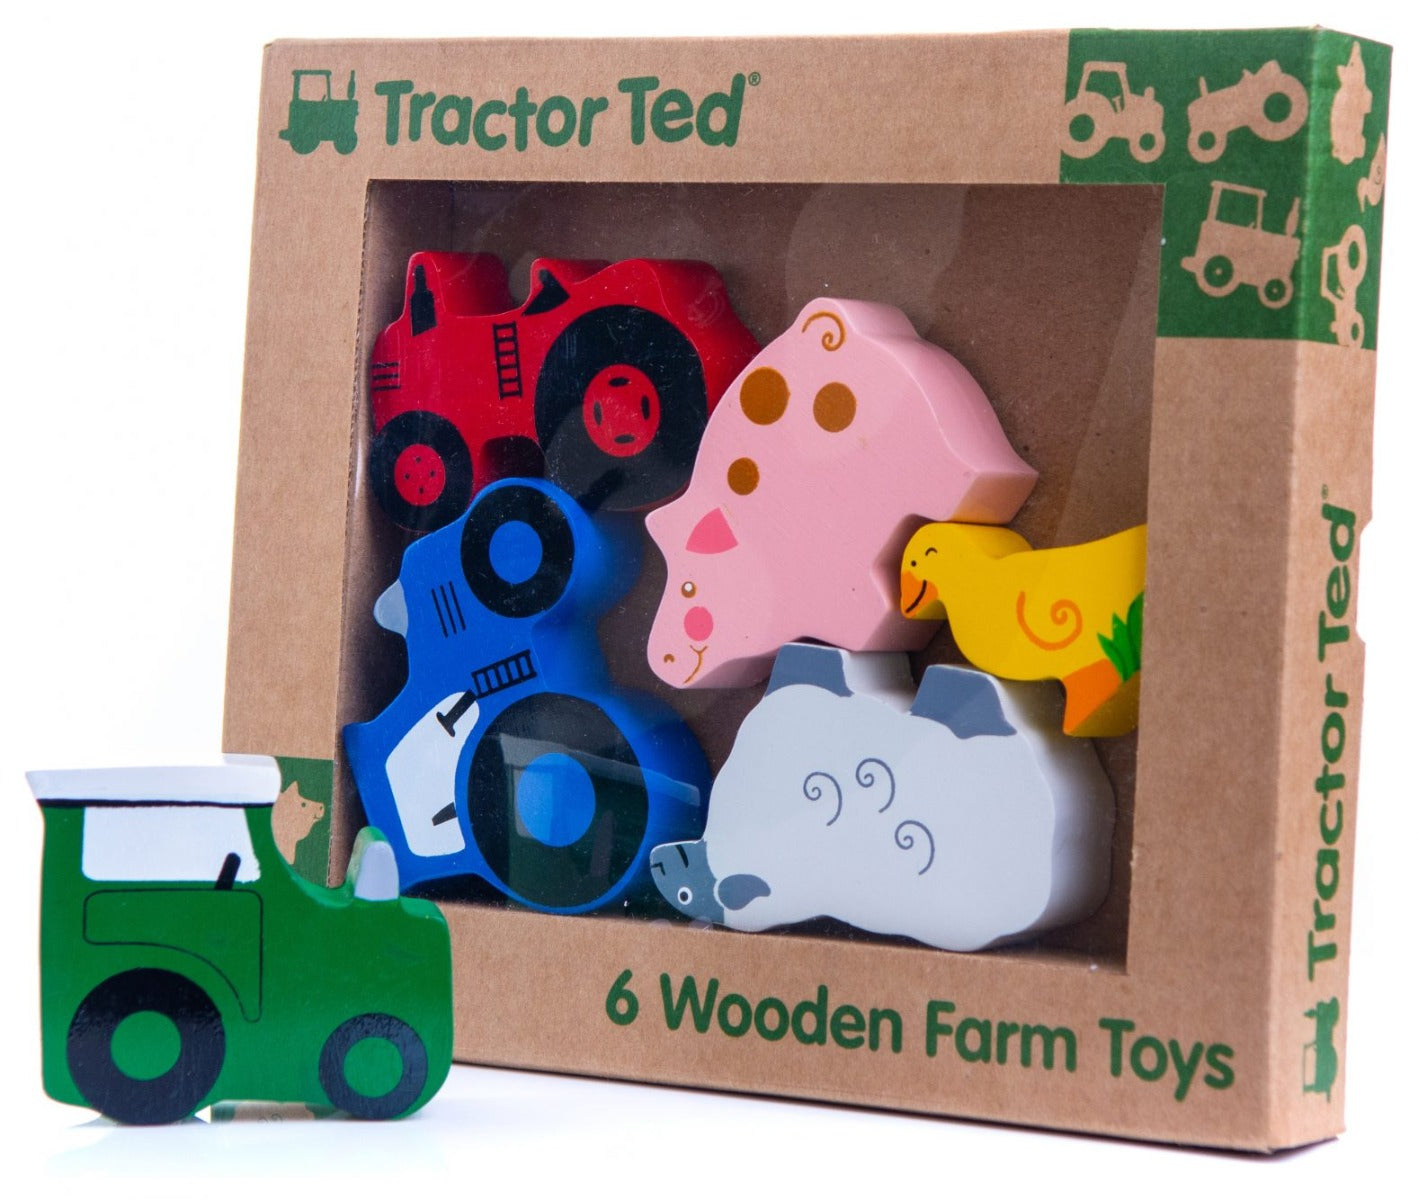 Tractor Ted Wooden Farm Toys